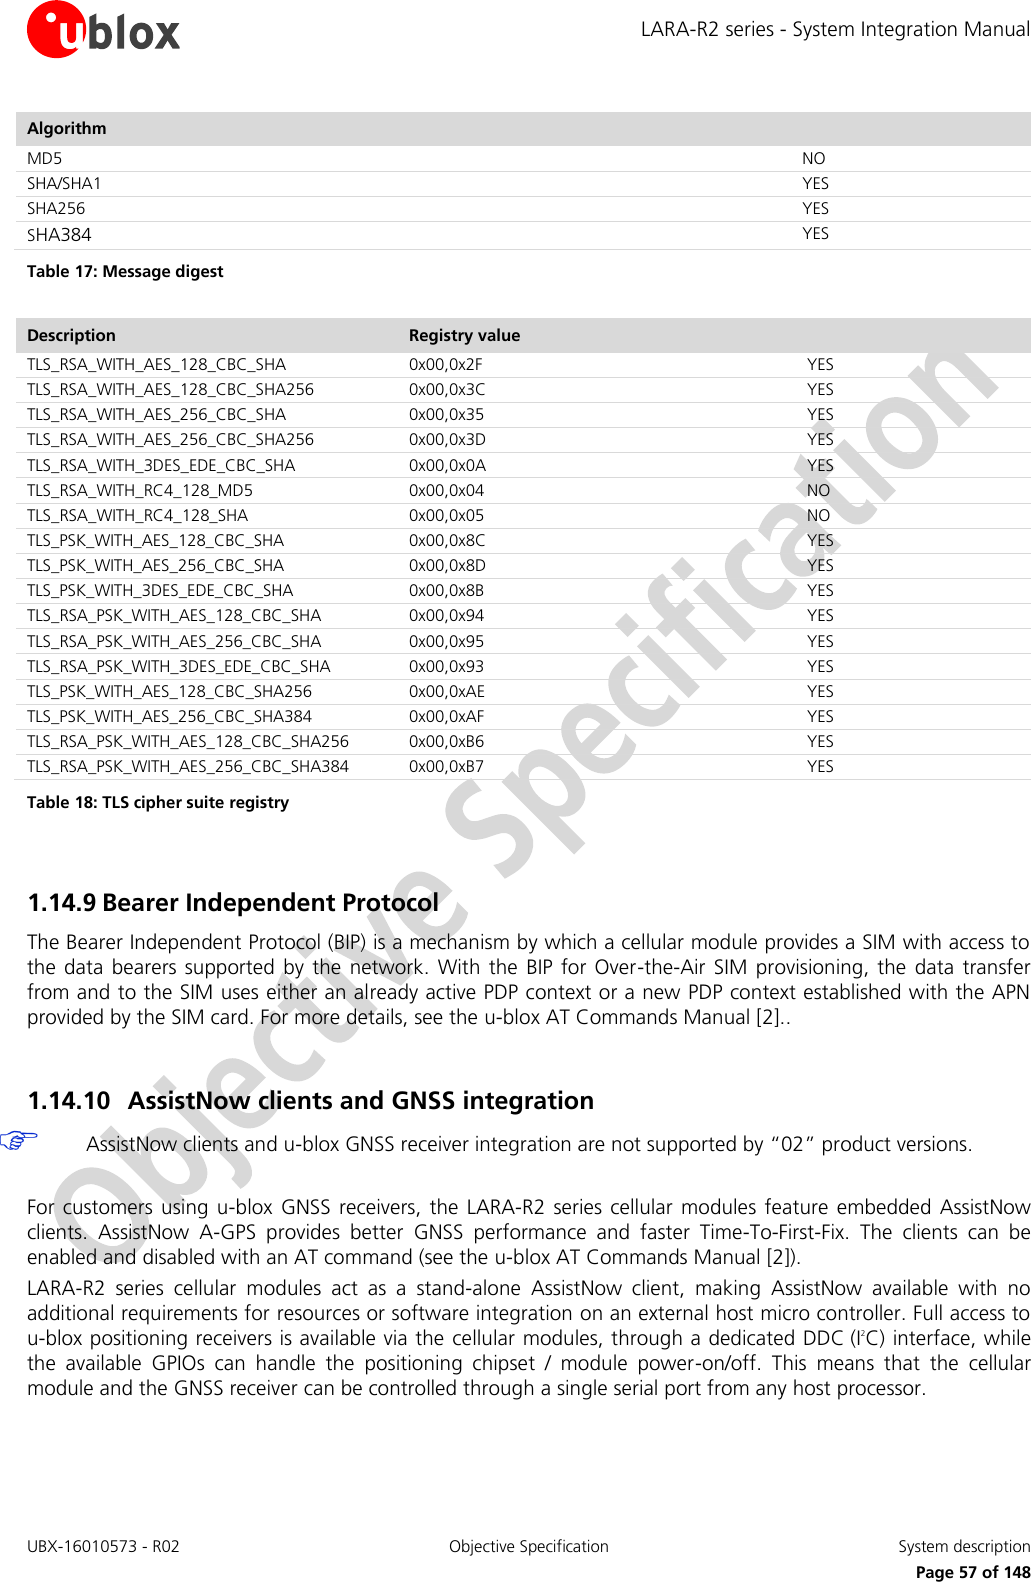 LARA-R2 series - System Integration Manual UBX-16010573 - R02 Objective Specification  System description     Page 57 of 148 Algorithm   MD5  NO SHA/SHA1  YES SHA256  YES SHA384  YES Table 17: Message digest  Description Registry value   TLS_RSA_WITH_AES_128_CBC_SHA 0x00,0x2F  YES TLS_RSA_WITH_AES_128_CBC_SHA256 0x00,0x3C  YES TLS_RSA_WITH_AES_256_CBC_SHA 0x00,0x35  YES TLS_RSA_WITH_AES_256_CBC_SHA256 0x00,0x3D  YES TLS_RSA_WITH_3DES_EDE_CBC_SHA 0x00,0x0A  YES TLS_RSA_WITH_RC4_128_MD5 0x00,0x04  NO TLS_RSA_WITH_RC4_128_SHA 0x00,0x05  NO TLS_PSK_WITH_AES_128_CBC_SHA 0x00,0x8C  YES TLS_PSK_WITH_AES_256_CBC_SHA 0x00,0x8D  YES TLS_PSK_WITH_3DES_EDE_CBC_SHA 0x00,0x8B  YES TLS_RSA_PSK_WITH_AES_128_CBC_SHA 0x00,0x94  YES TLS_RSA_PSK_WITH_AES_256_CBC_SHA 0x00,0x95  YES TLS_RSA_PSK_WITH_3DES_EDE_CBC_SHA 0x00,0x93  YES TLS_PSK_WITH_AES_128_CBC_SHA256 0x00,0xAE  YES TLS_PSK_WITH_AES_256_CBC_SHA384 0x00,0xAF  YES TLS_RSA_PSK_WITH_AES_128_CBC_SHA256 0x00,0xB6  YES TLS_RSA_PSK_WITH_AES_256_CBC_SHA384 0x00,0xB7  YES Table 18: TLS cipher suite registry  1.14.9 Bearer Independent Protocol The Bearer Independent Protocol (BIP) is a mechanism by which a cellular module provides a SIM with access to the  data  bearers  supported  by  the  network.  With  the  BIP  for  Over-the-Air  SIM  provisioning,  the  data  transfer from and to the SIM uses either an already active PDP context or a new PDP context established with the APN provided by the SIM card. For more details, see the u-blox AT Commands Manual [2]..  1.14.10 AssistNow clients and GNSS integration  AssistNow clients and u-blox GNSS receiver integration are not supported by “02” product versions.  For customers  using  u-blox  GNSS  receivers,  the  LARA-R2  series cellular  modules  feature  embedded  AssistNow clients.  AssistNow  A-GPS  provides  better  GNSS  performance  and  faster  Time-To-First-Fix.  The  clients  can  be enabled and disabled with an AT command (see the u-blox AT Commands Manual [2]). LARA-R2  series  cellular  modules  act  as  a  stand-alone  AssistNow  client,  making  AssistNow  available  with  no additional requirements for resources or software integration on an external host micro controller. Full access to u-blox positioning receivers is available via the cellular modules, through a dedicated DDC (I2C) interface, while the  available  GPIOs  can  handle  the  positioning  chipset  /  module  power-on/off.  This  means  that  the  cellular module and the GNSS receiver can be controlled through a single serial port from any host processor.  